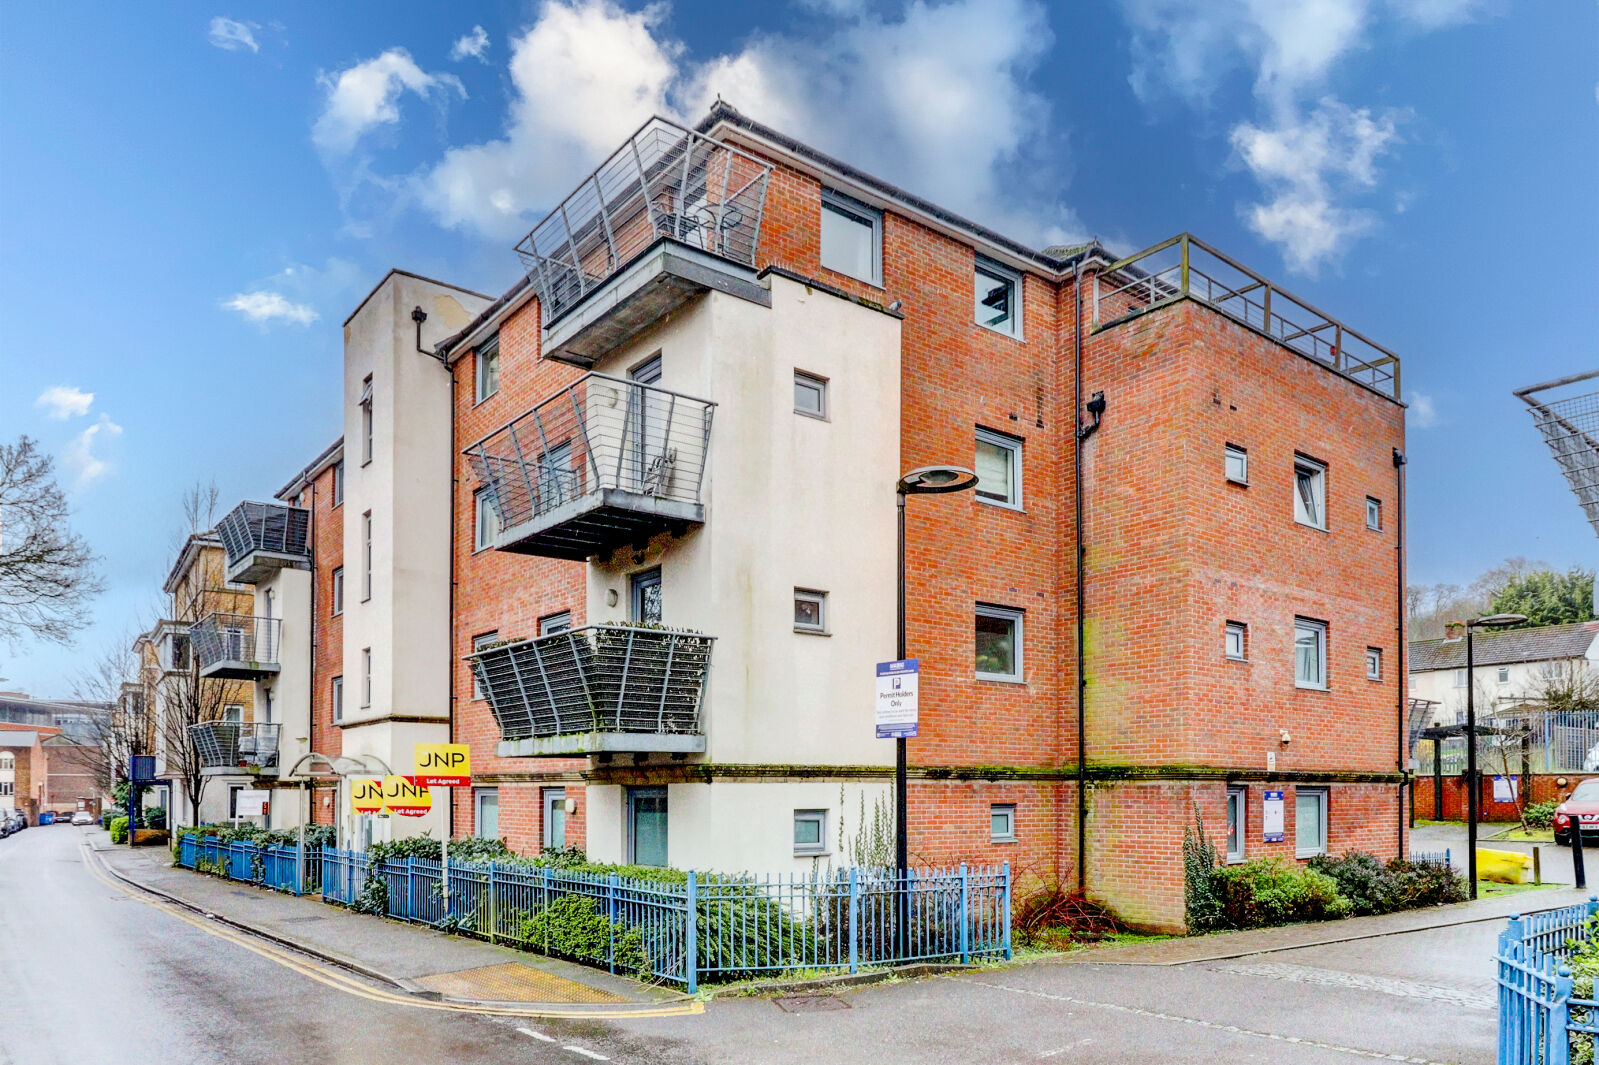 3 bedroom  flat for sale West End Road, High Wycombe, HP11, main image